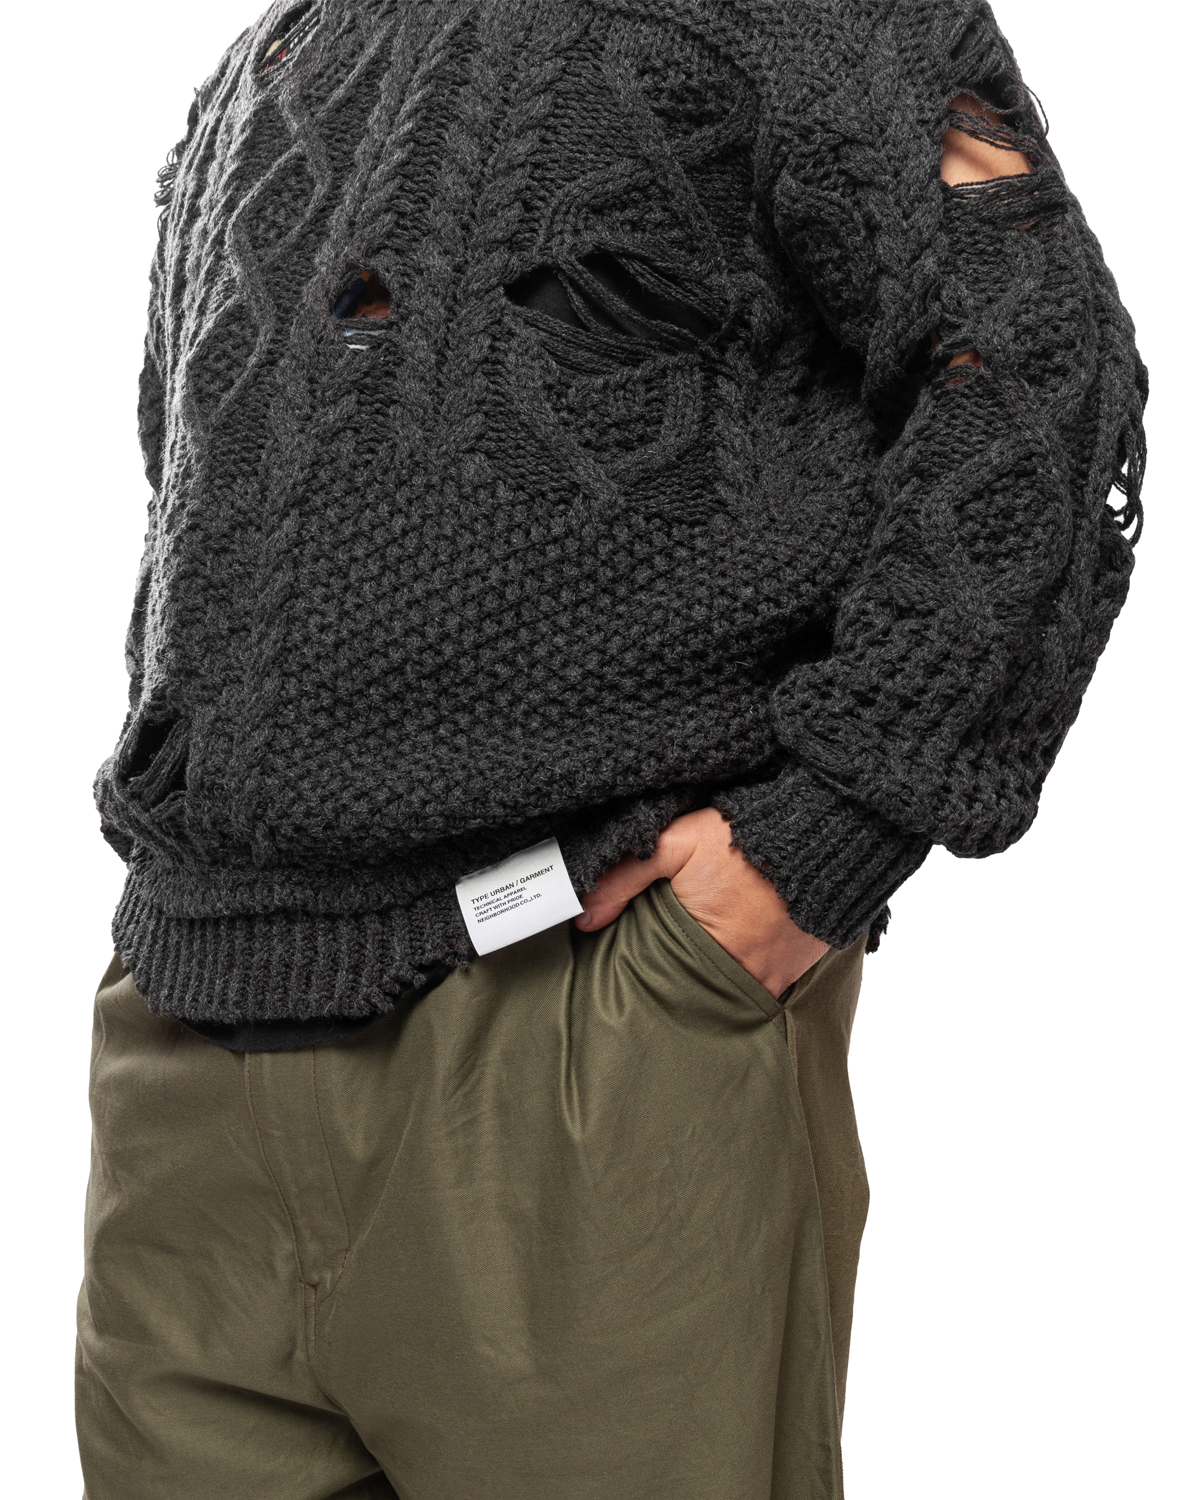 Patchwork Savage Sweater Charcoal